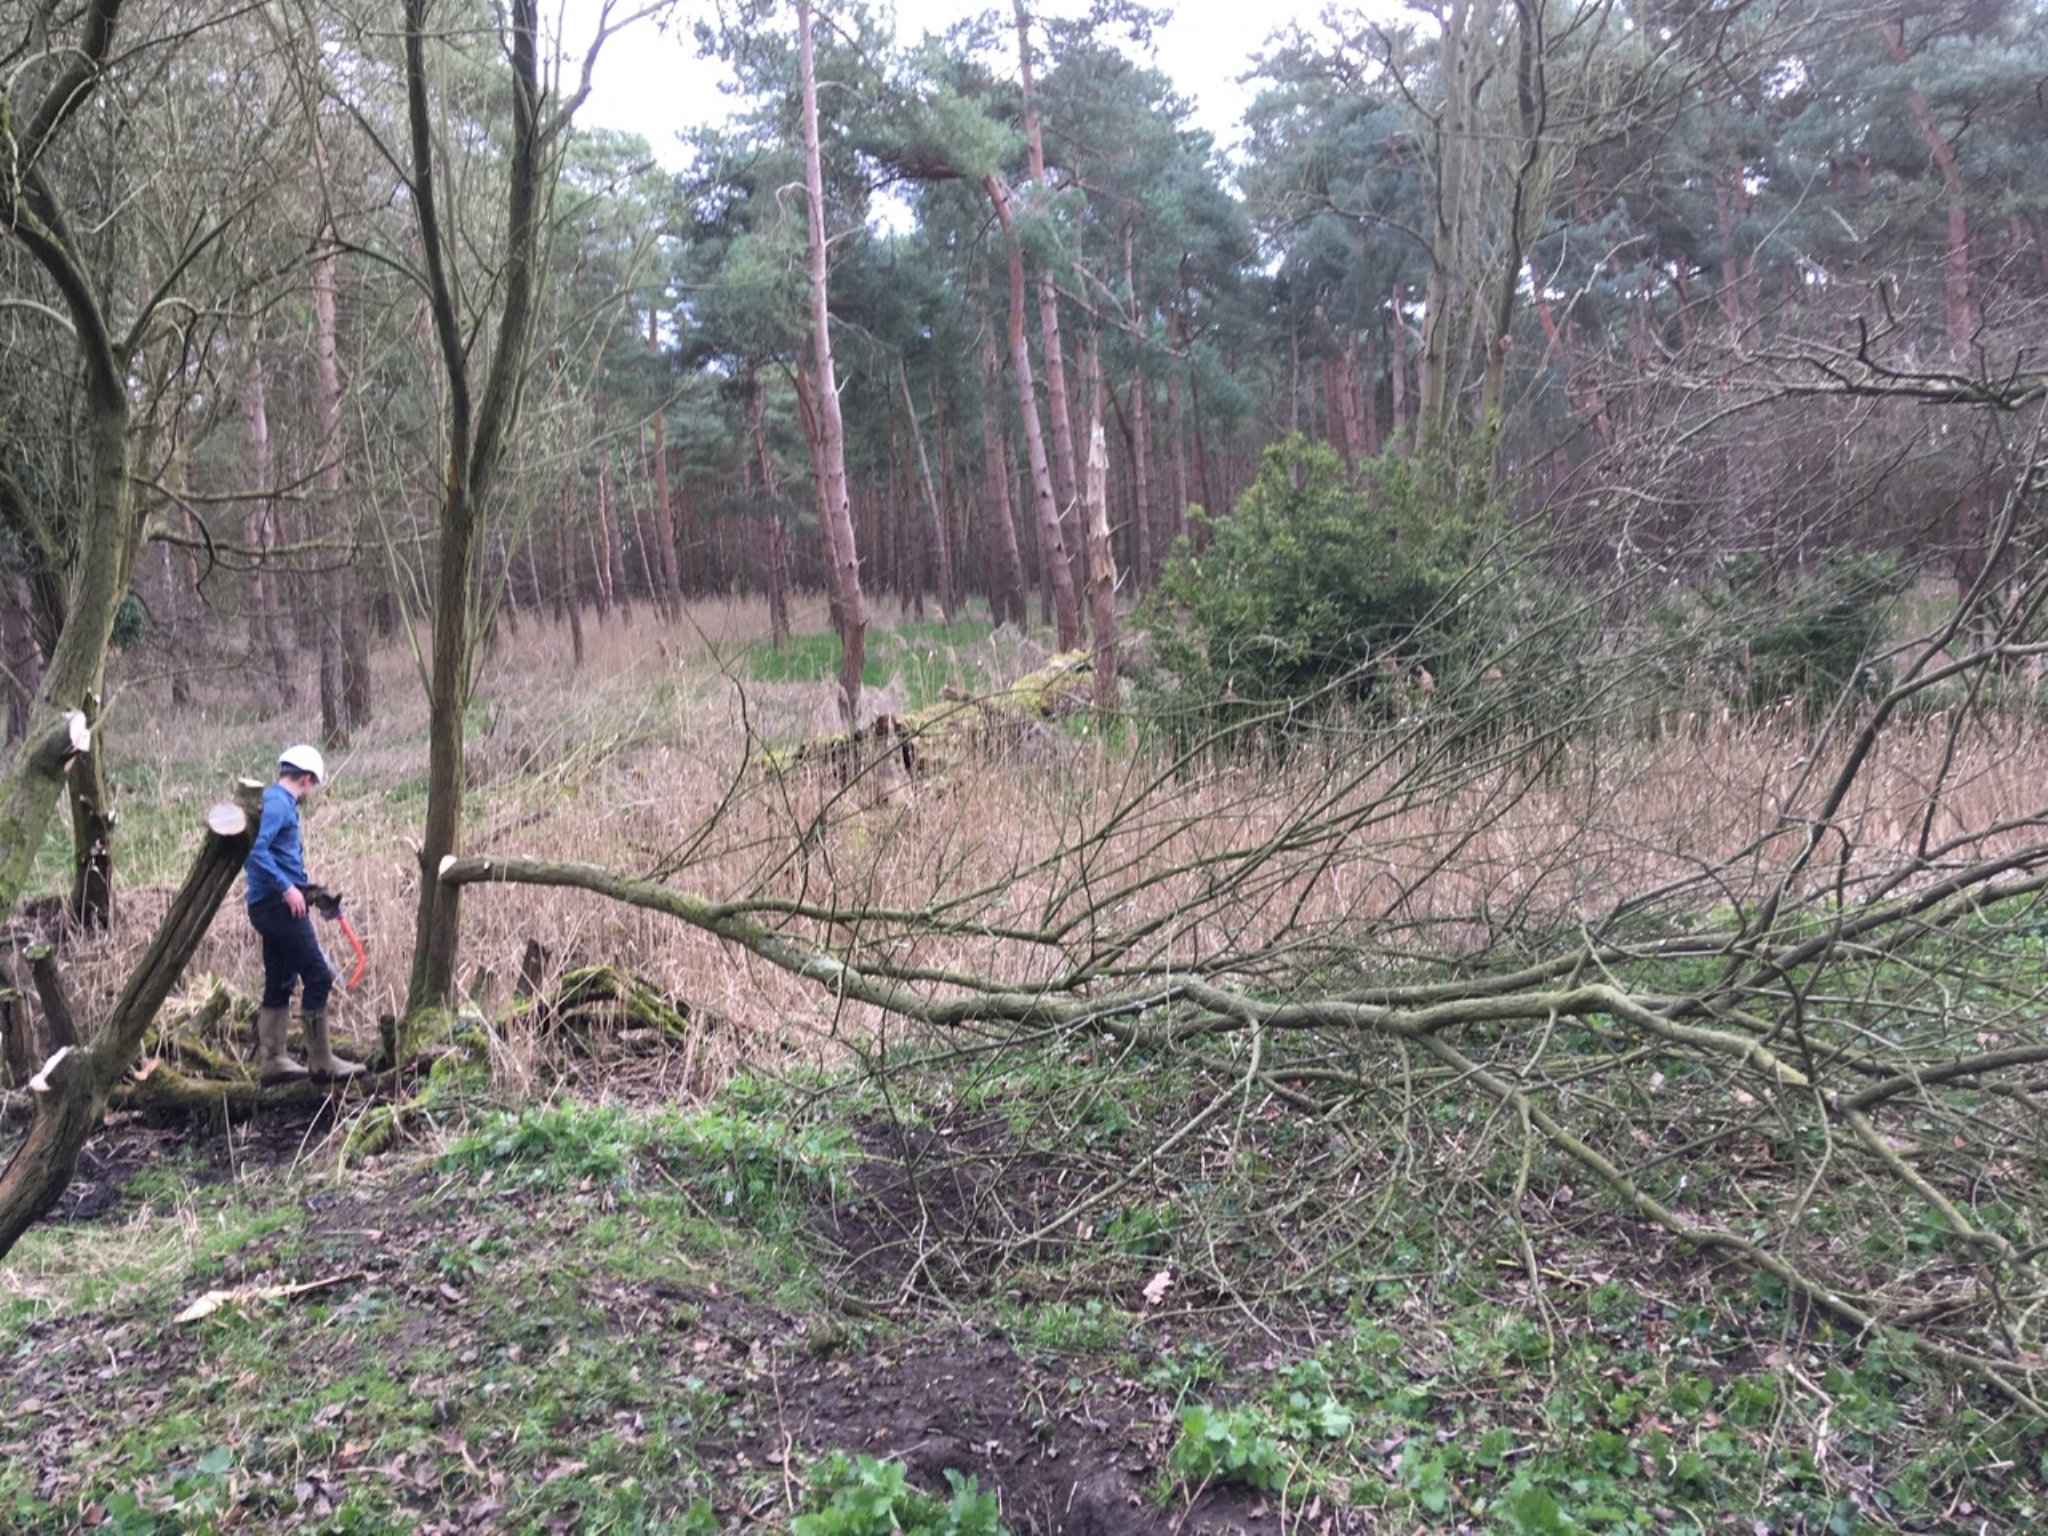 A photo from the FoTF Conservation Event - March 2019 - Clearance work around, and in, the ponds at Harling Woods, Harling : Volunteers work to cut down trees